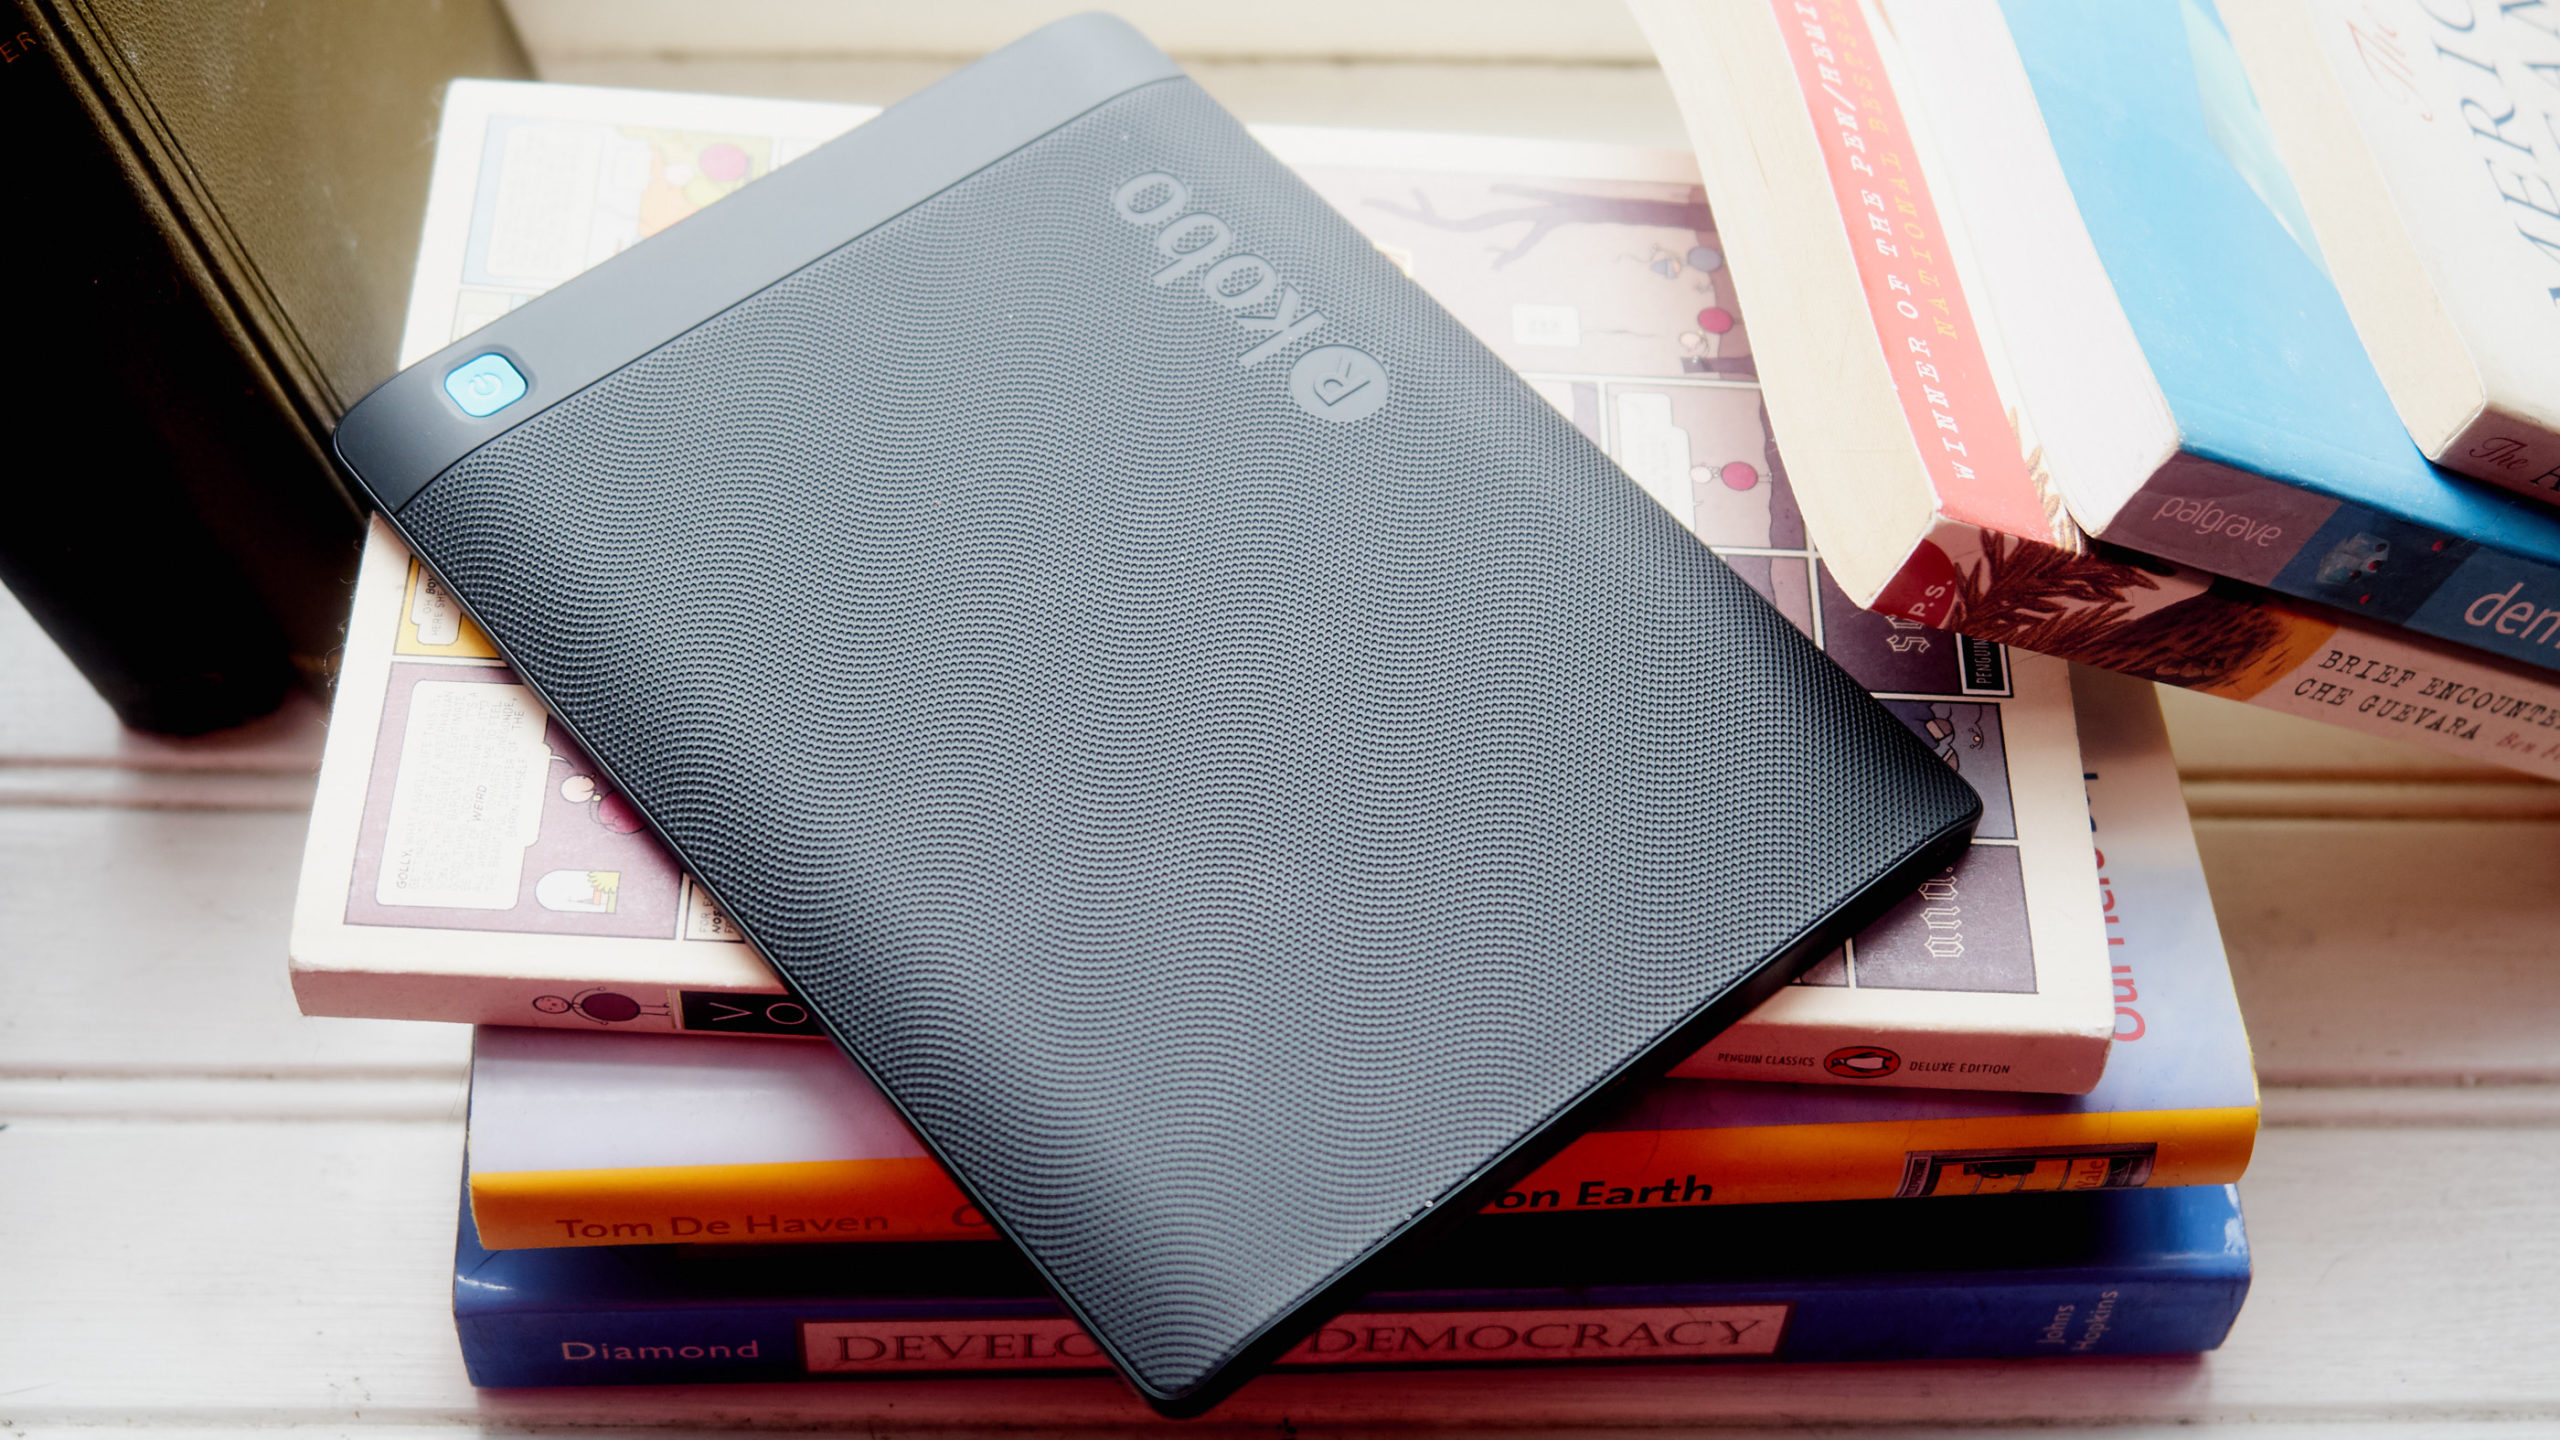 Amazon’s Kindle Is King, So Why Would I Buy This Other E-Reader?